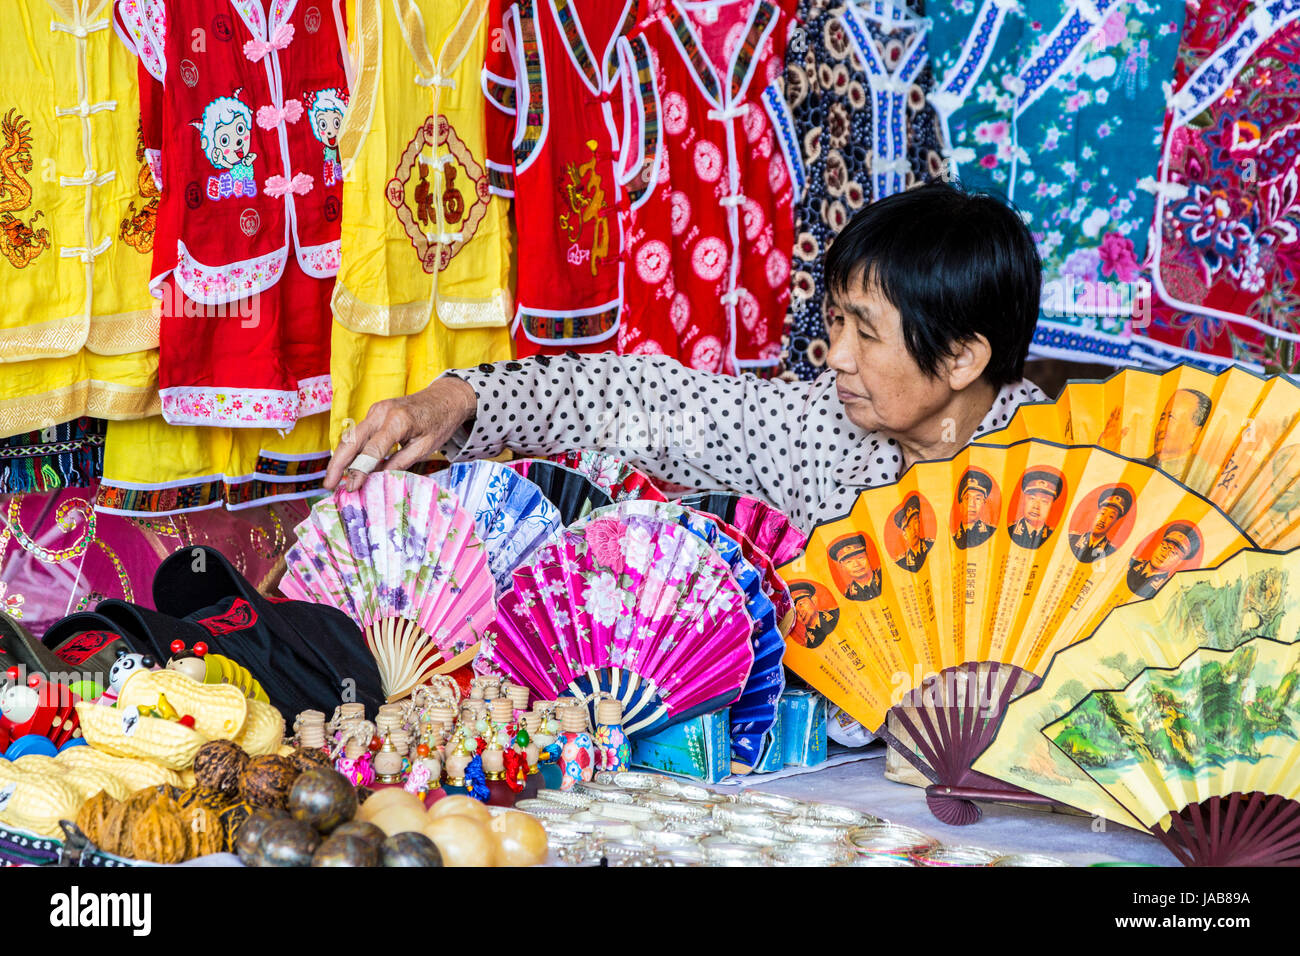 Yangshuo, China.  Vendor Selling Fans, Clothing, and Souvenirs. Stock Photo